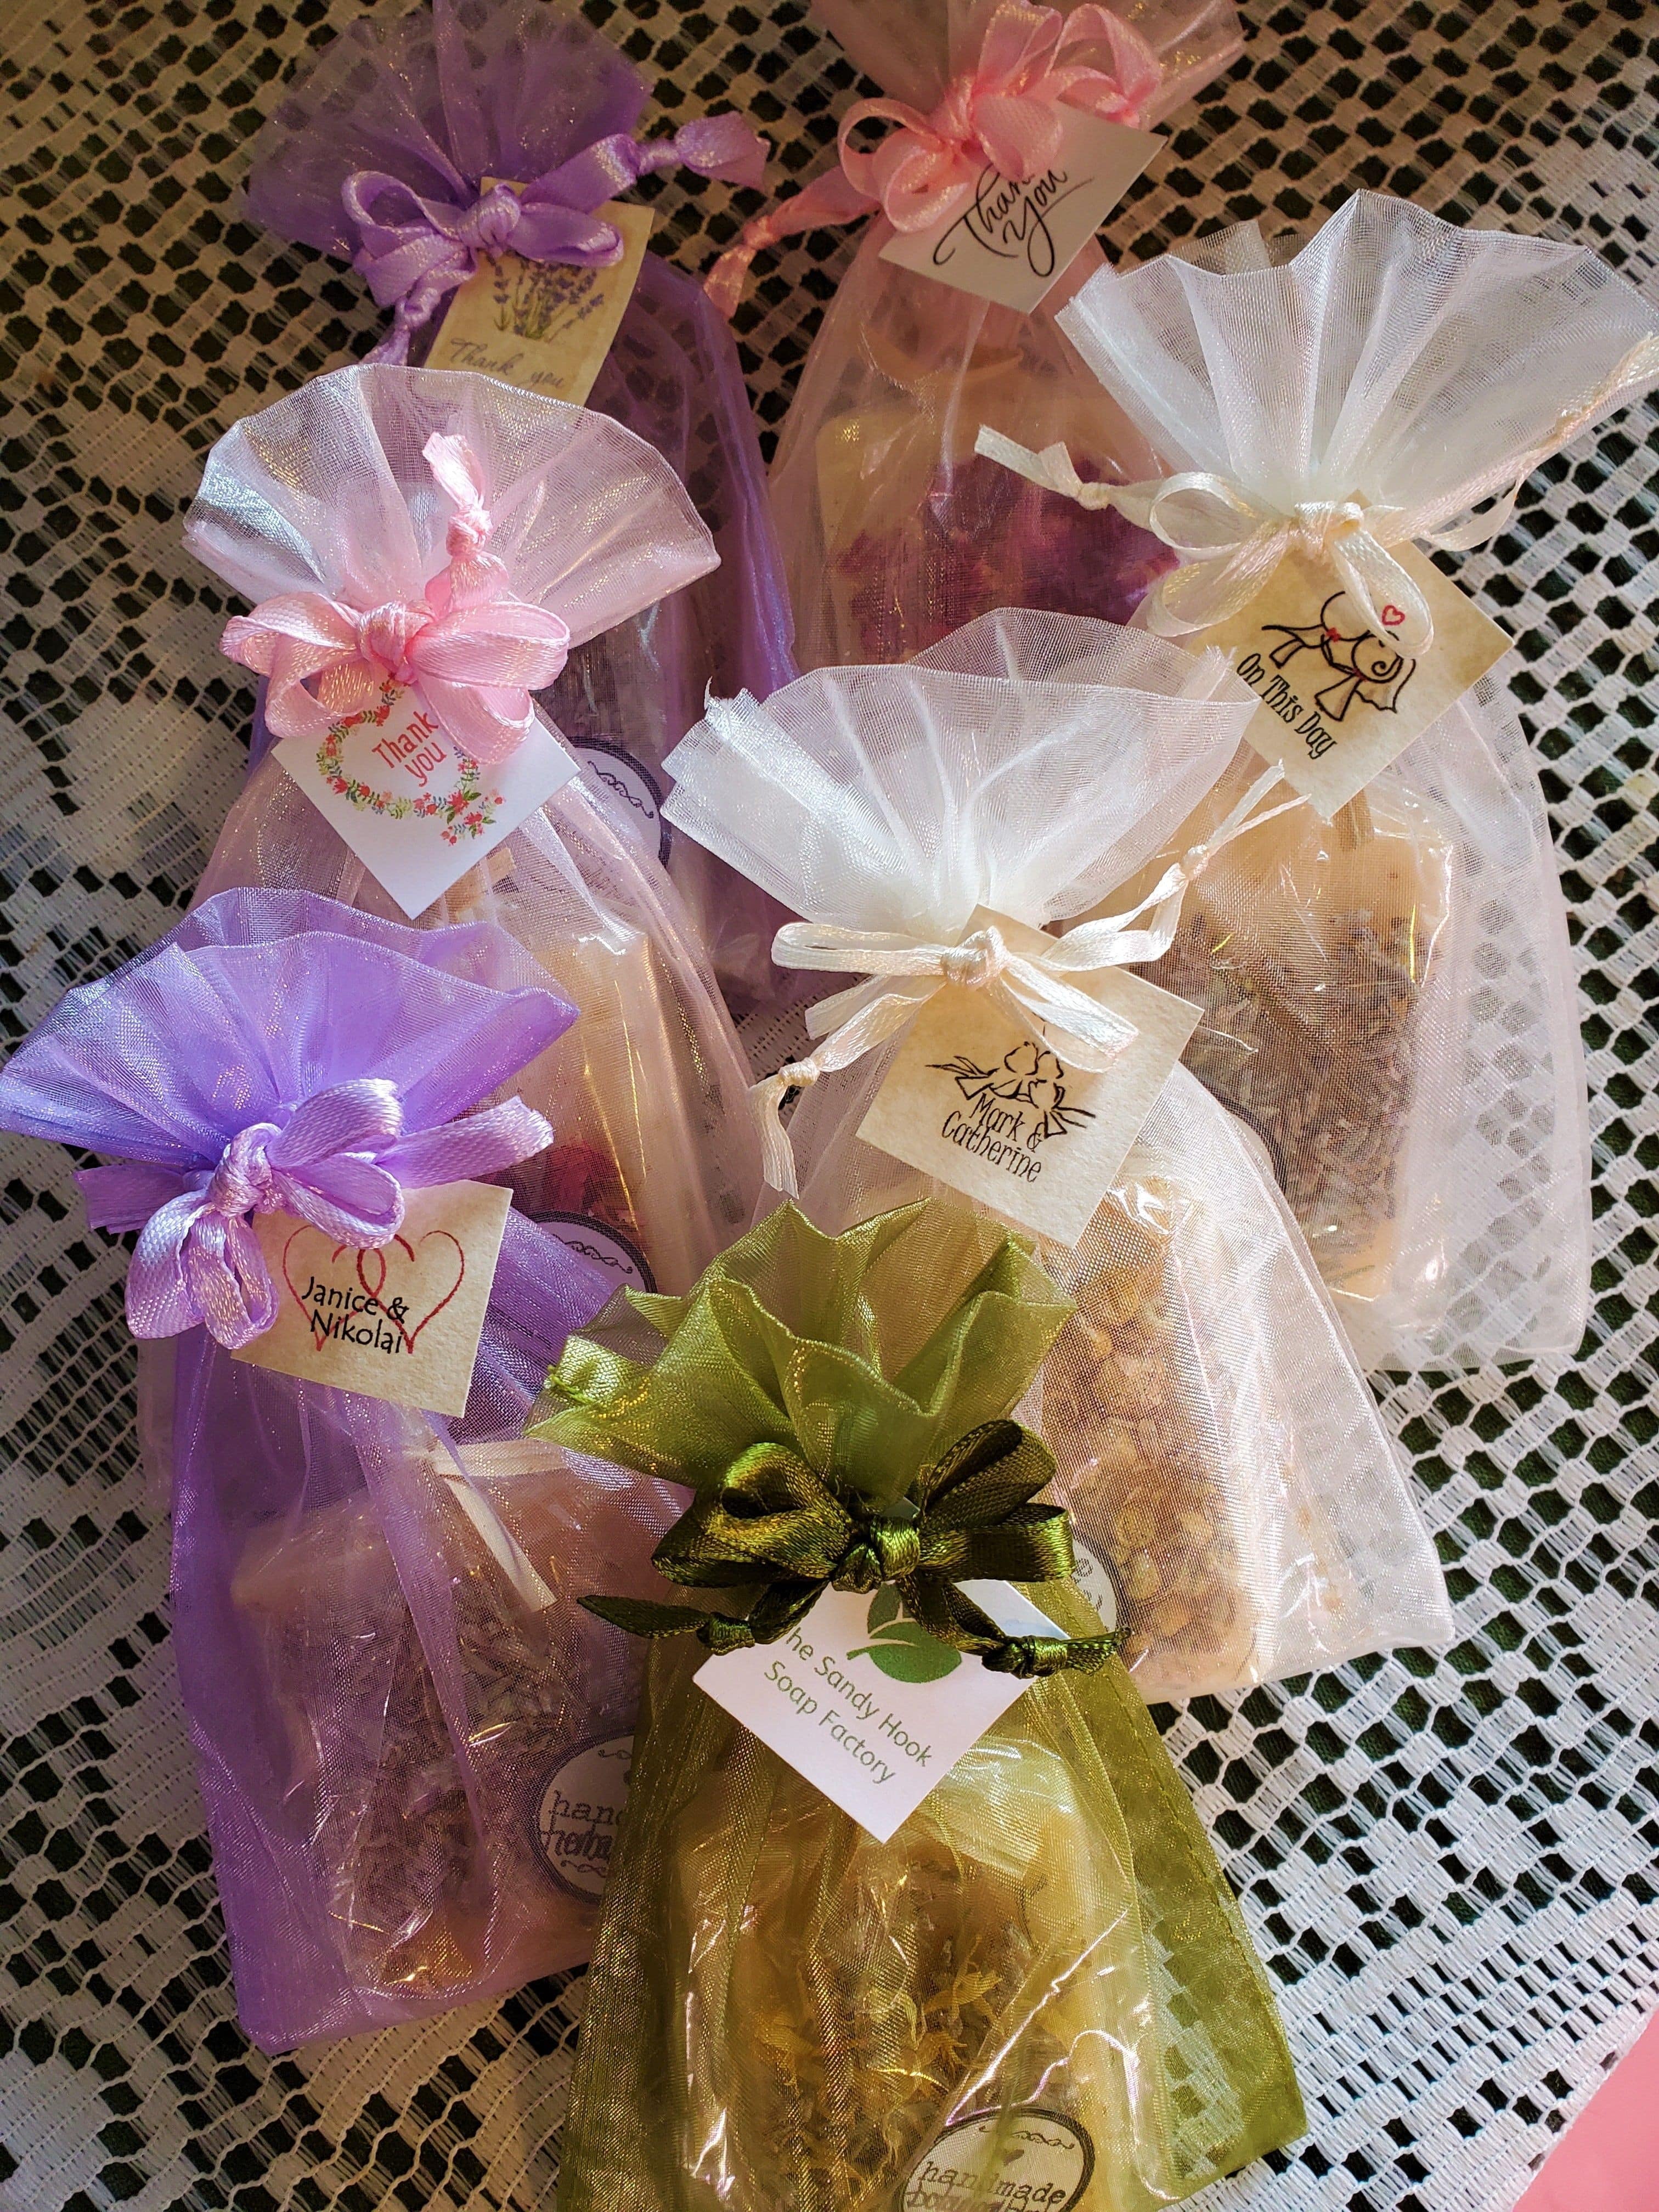 Our Floral Elegance soap favours are an extra special presentation with organic botanicals and complimenting organza bag for Wedding Day or Bridal Shower.